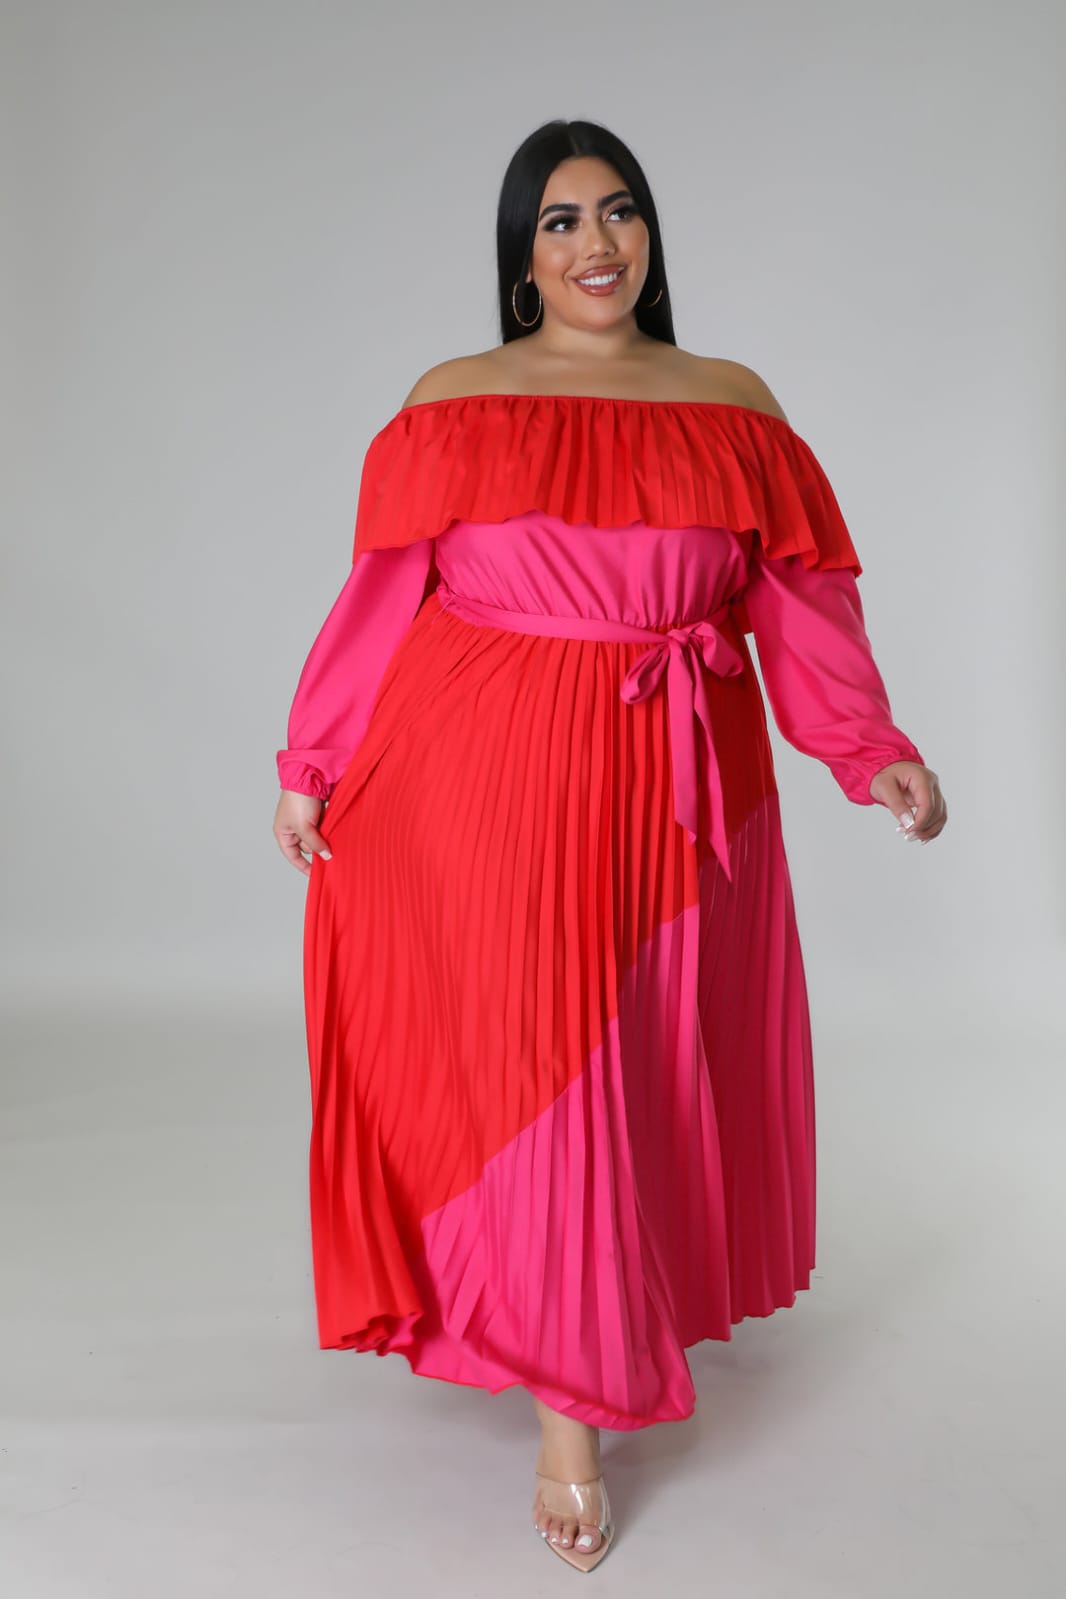 All Over Pleated Off-Shoulder Dress for Women Plus Size